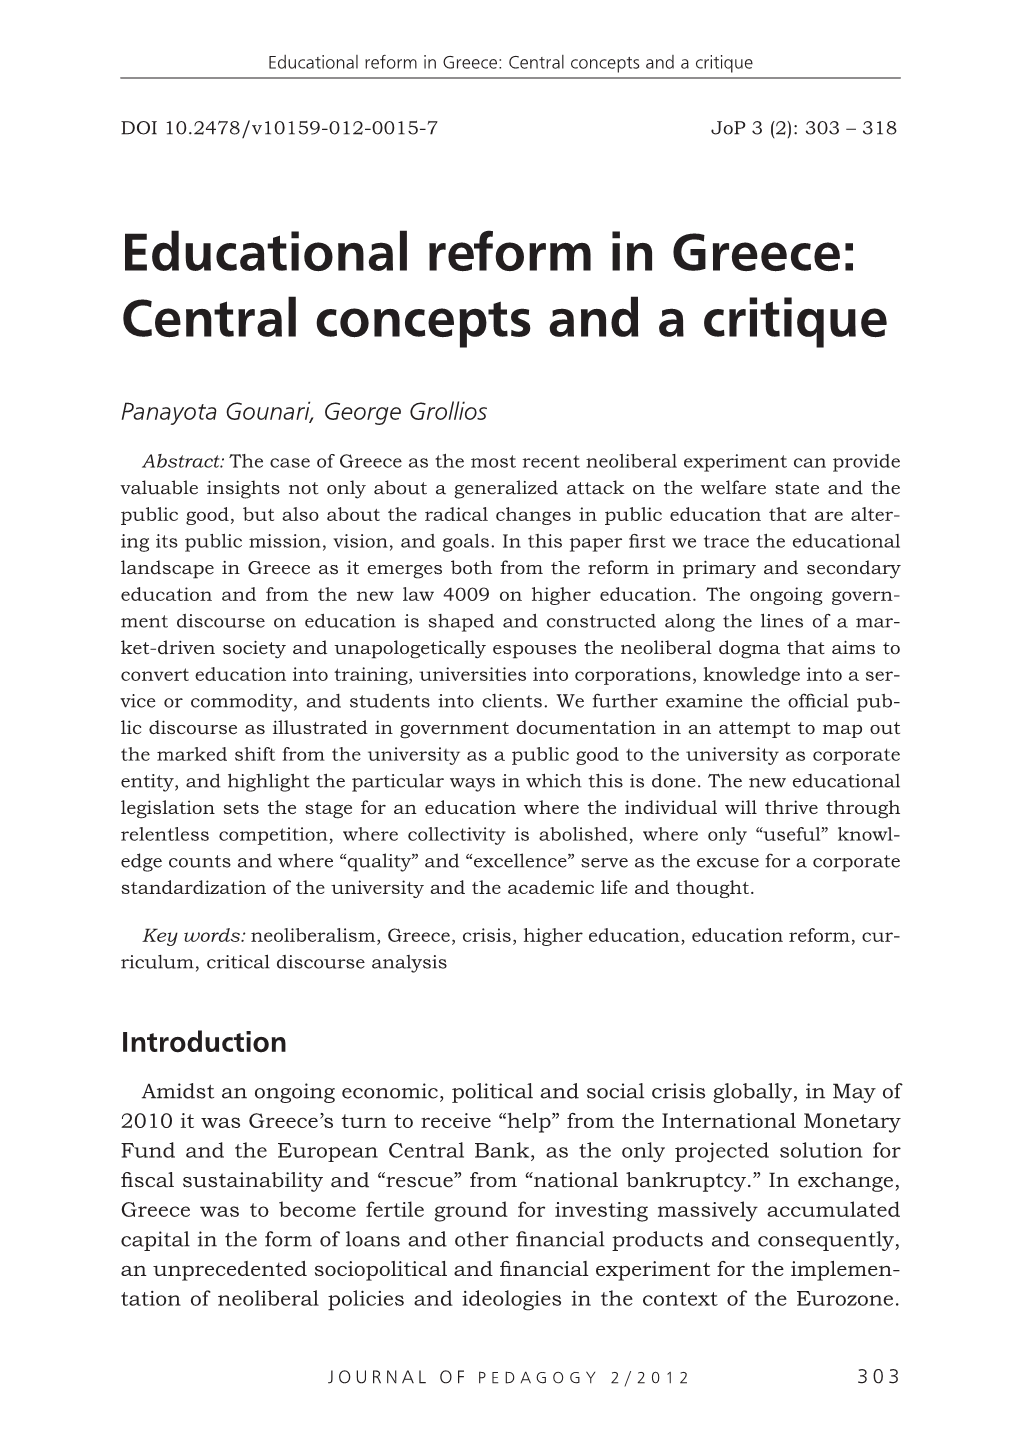 Educational Reform in Greece: Central Concepts and a Critique